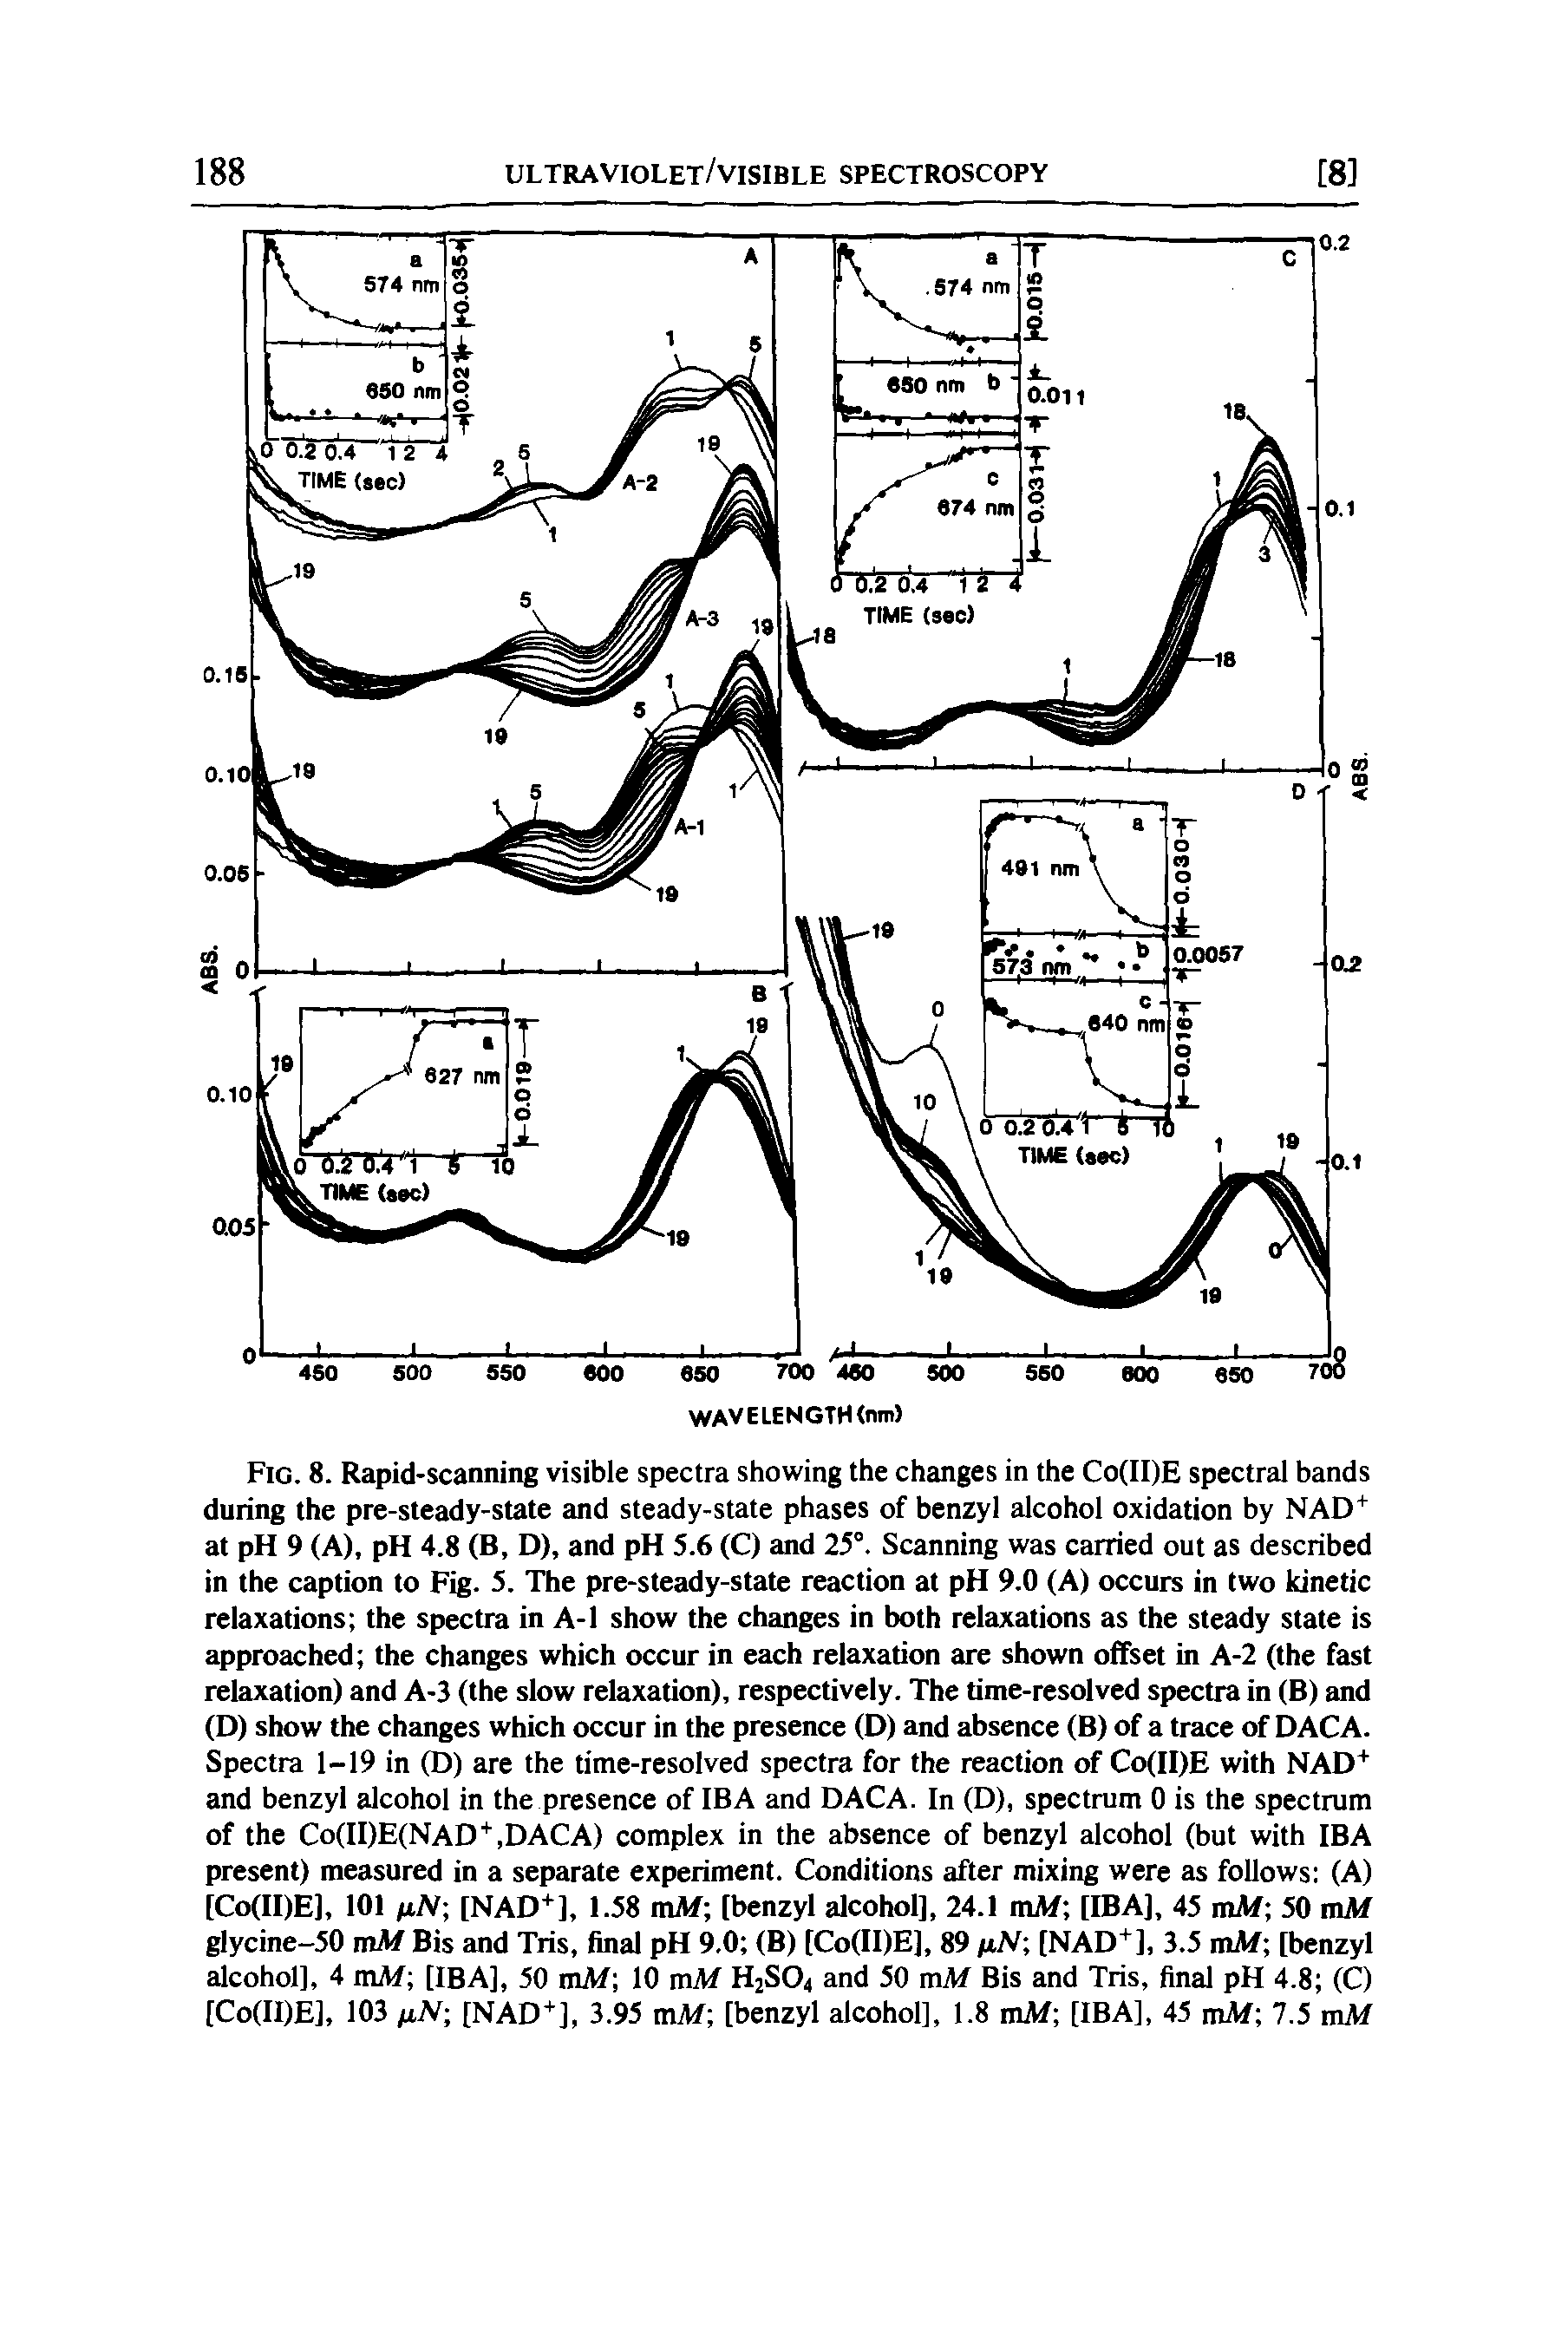 Fig. 8. Rapid-scanning visible spectra showing the changes in the Co(II)E spectral bands during the pre-steady-state and steady-state phases of benzyl alcohol oxidation by NAD at pH 9 (A), pH 4.8 (B, D), and pH 5.6 (C) and 25°. Scanning was carried out as described in the caption to Fig. 5. The pre-steady-state reaction at pH 9.0 (A) occurs in two kinetic relaxations the spectra in A-1 show the changes in both relaxations as the steady state is approached the changes which occur in each relaxation are shown offset in A-2 (the fast relaxation) and A-3 (the slow relaxation), respectively. The time-resolved spectra in (B) and...